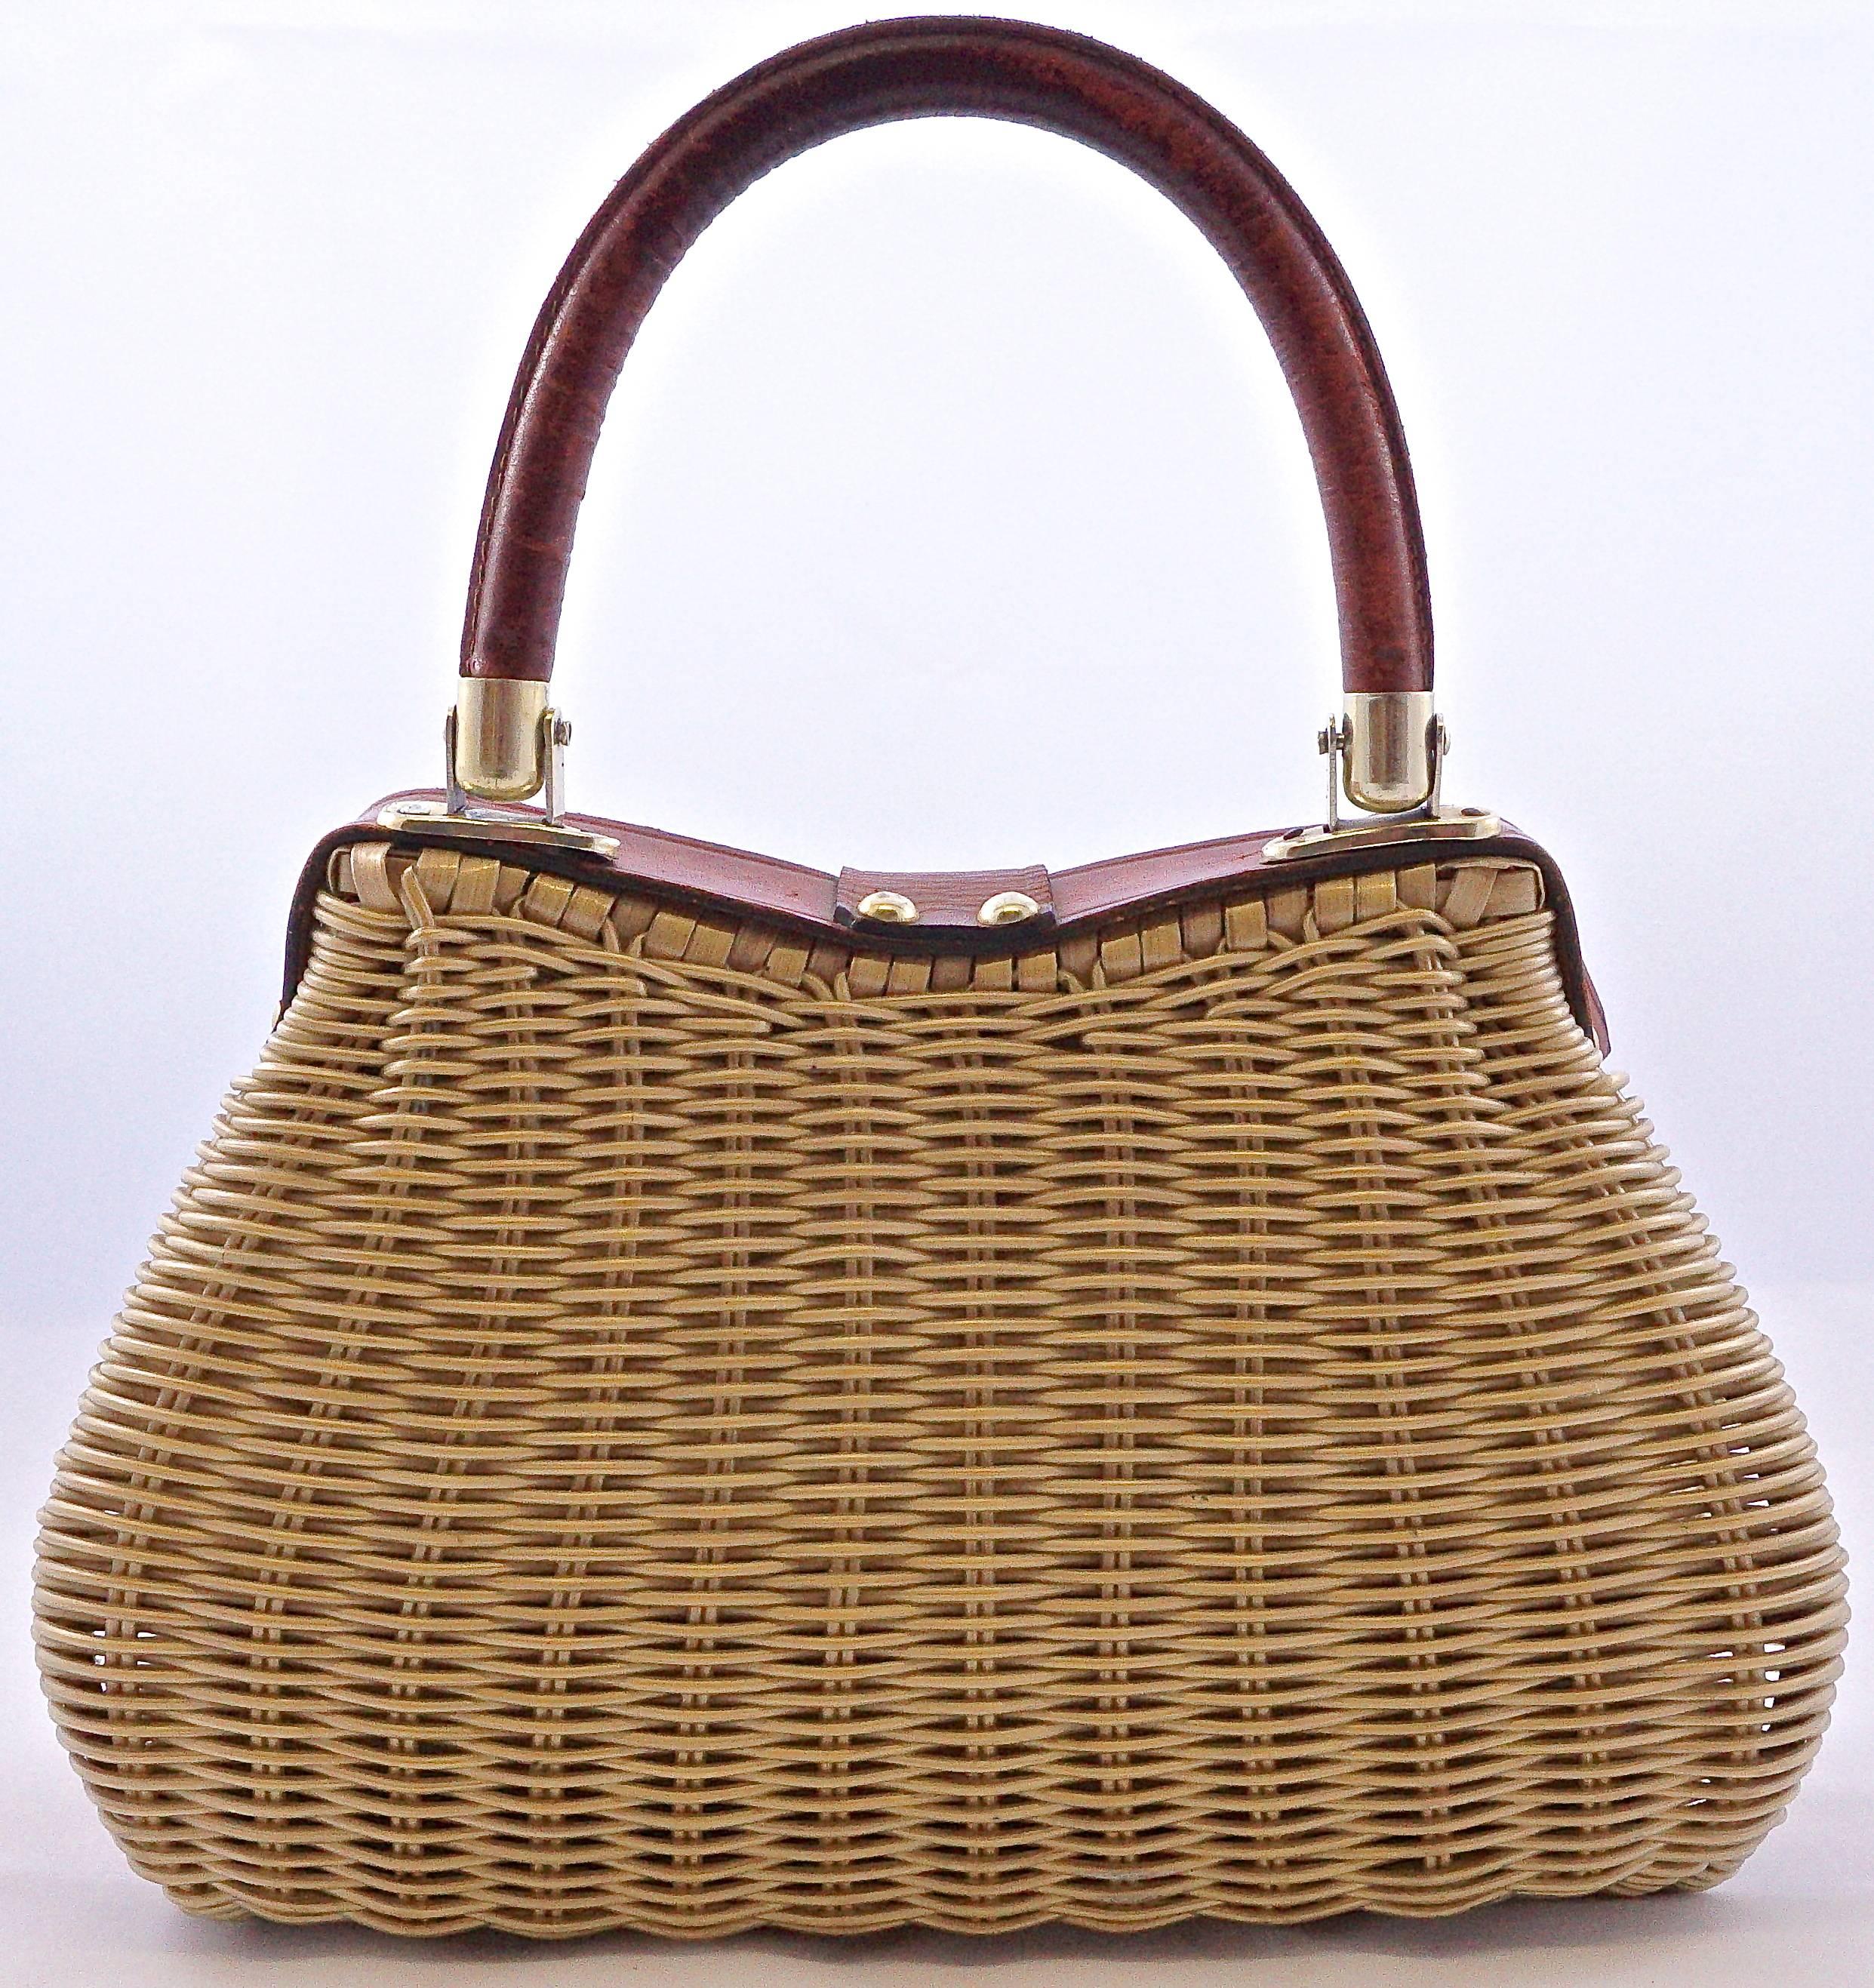 This stylish wicker bag, with dark tan leather detail and gold tone metal fittings, was made in British Hong Kong, circa 1960s. Measuring maximum width 27.5cm, 10.8 inches, by maximum height 19cm, 7.5 inches. Handle drop 13.3cm, 5.2 inches. The